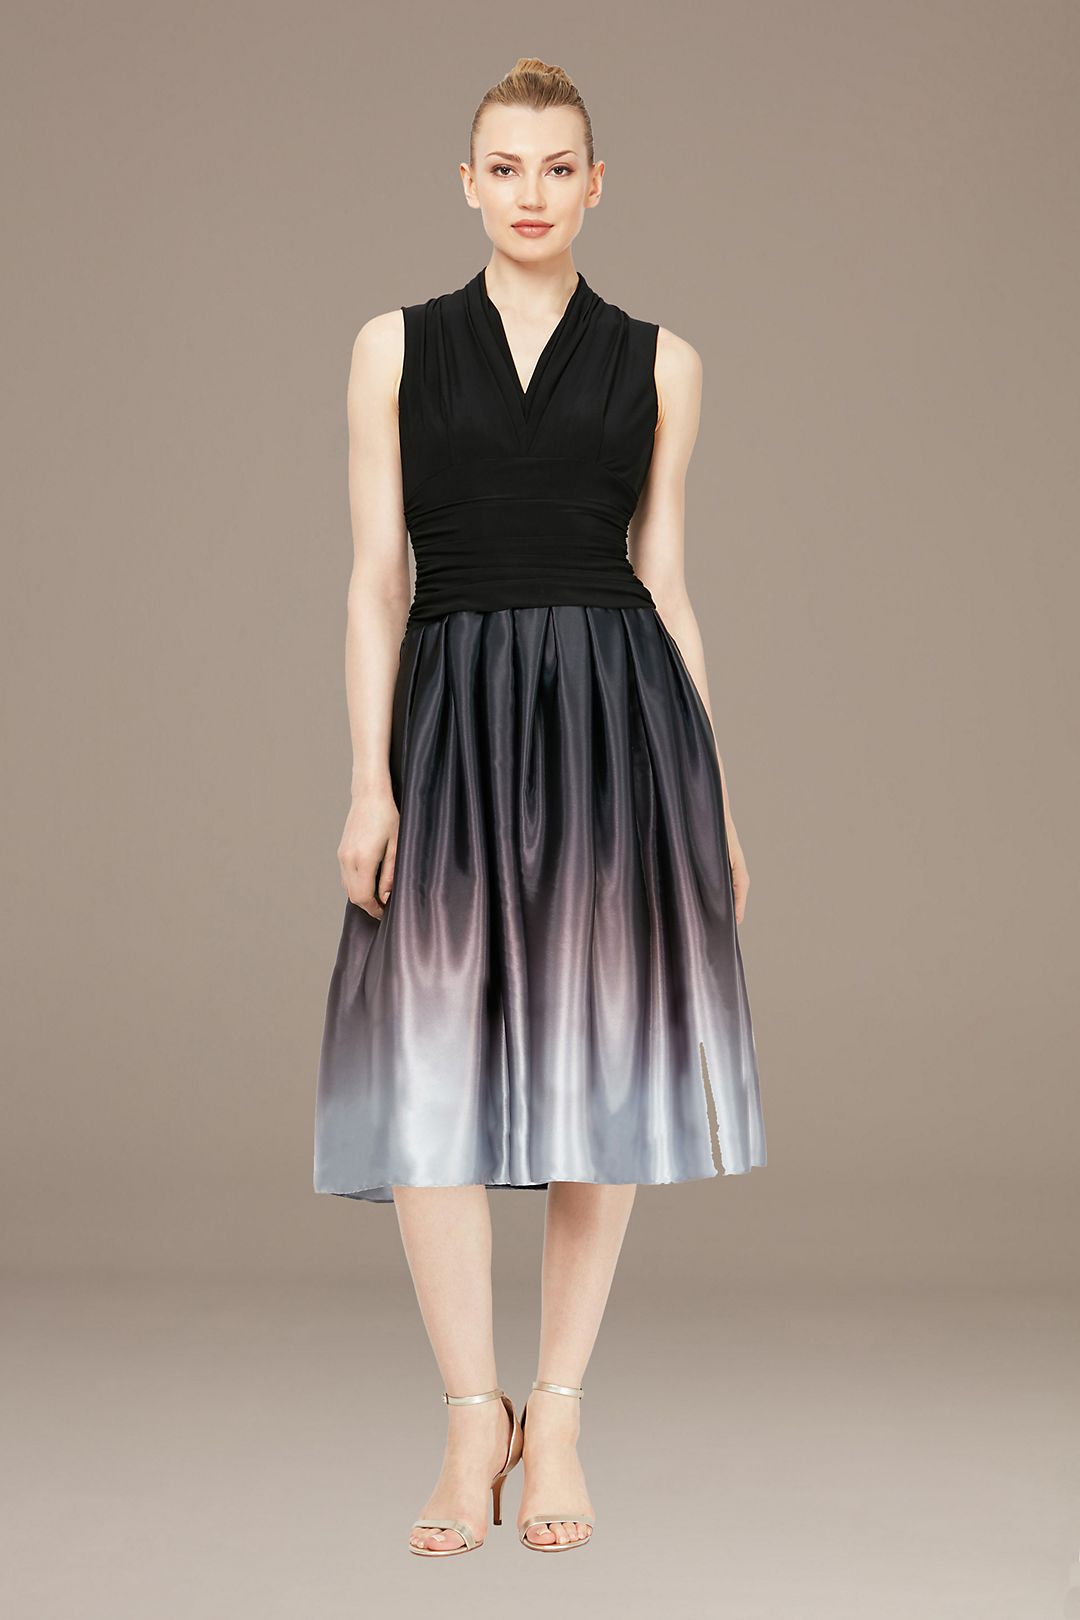 Satin Charmeuse Party Dress with Ruched Waist Image 1